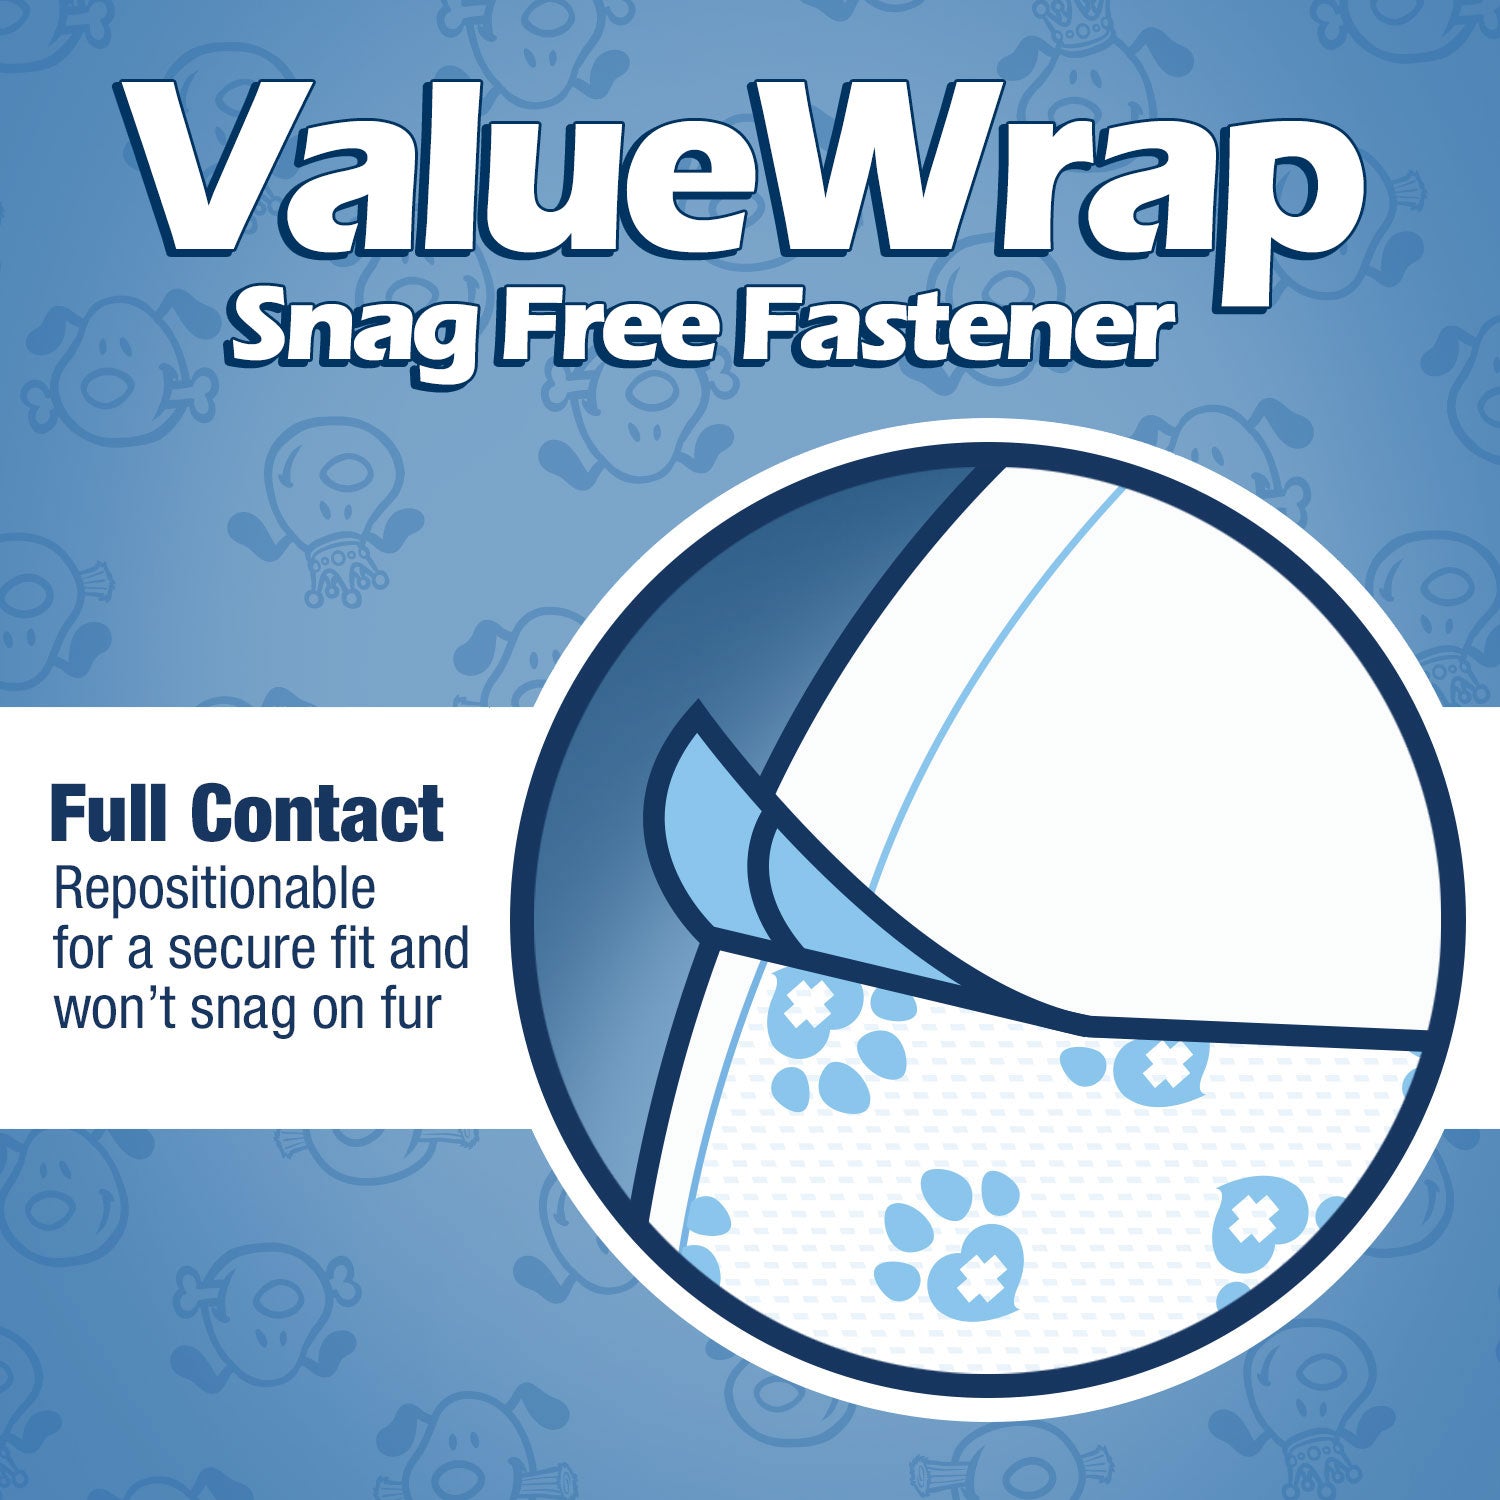 ValueWrap Male Wraps, Disposable Dog Diapers, Carbon, 1-Tab Extra Small, 288 Count BULK PACK